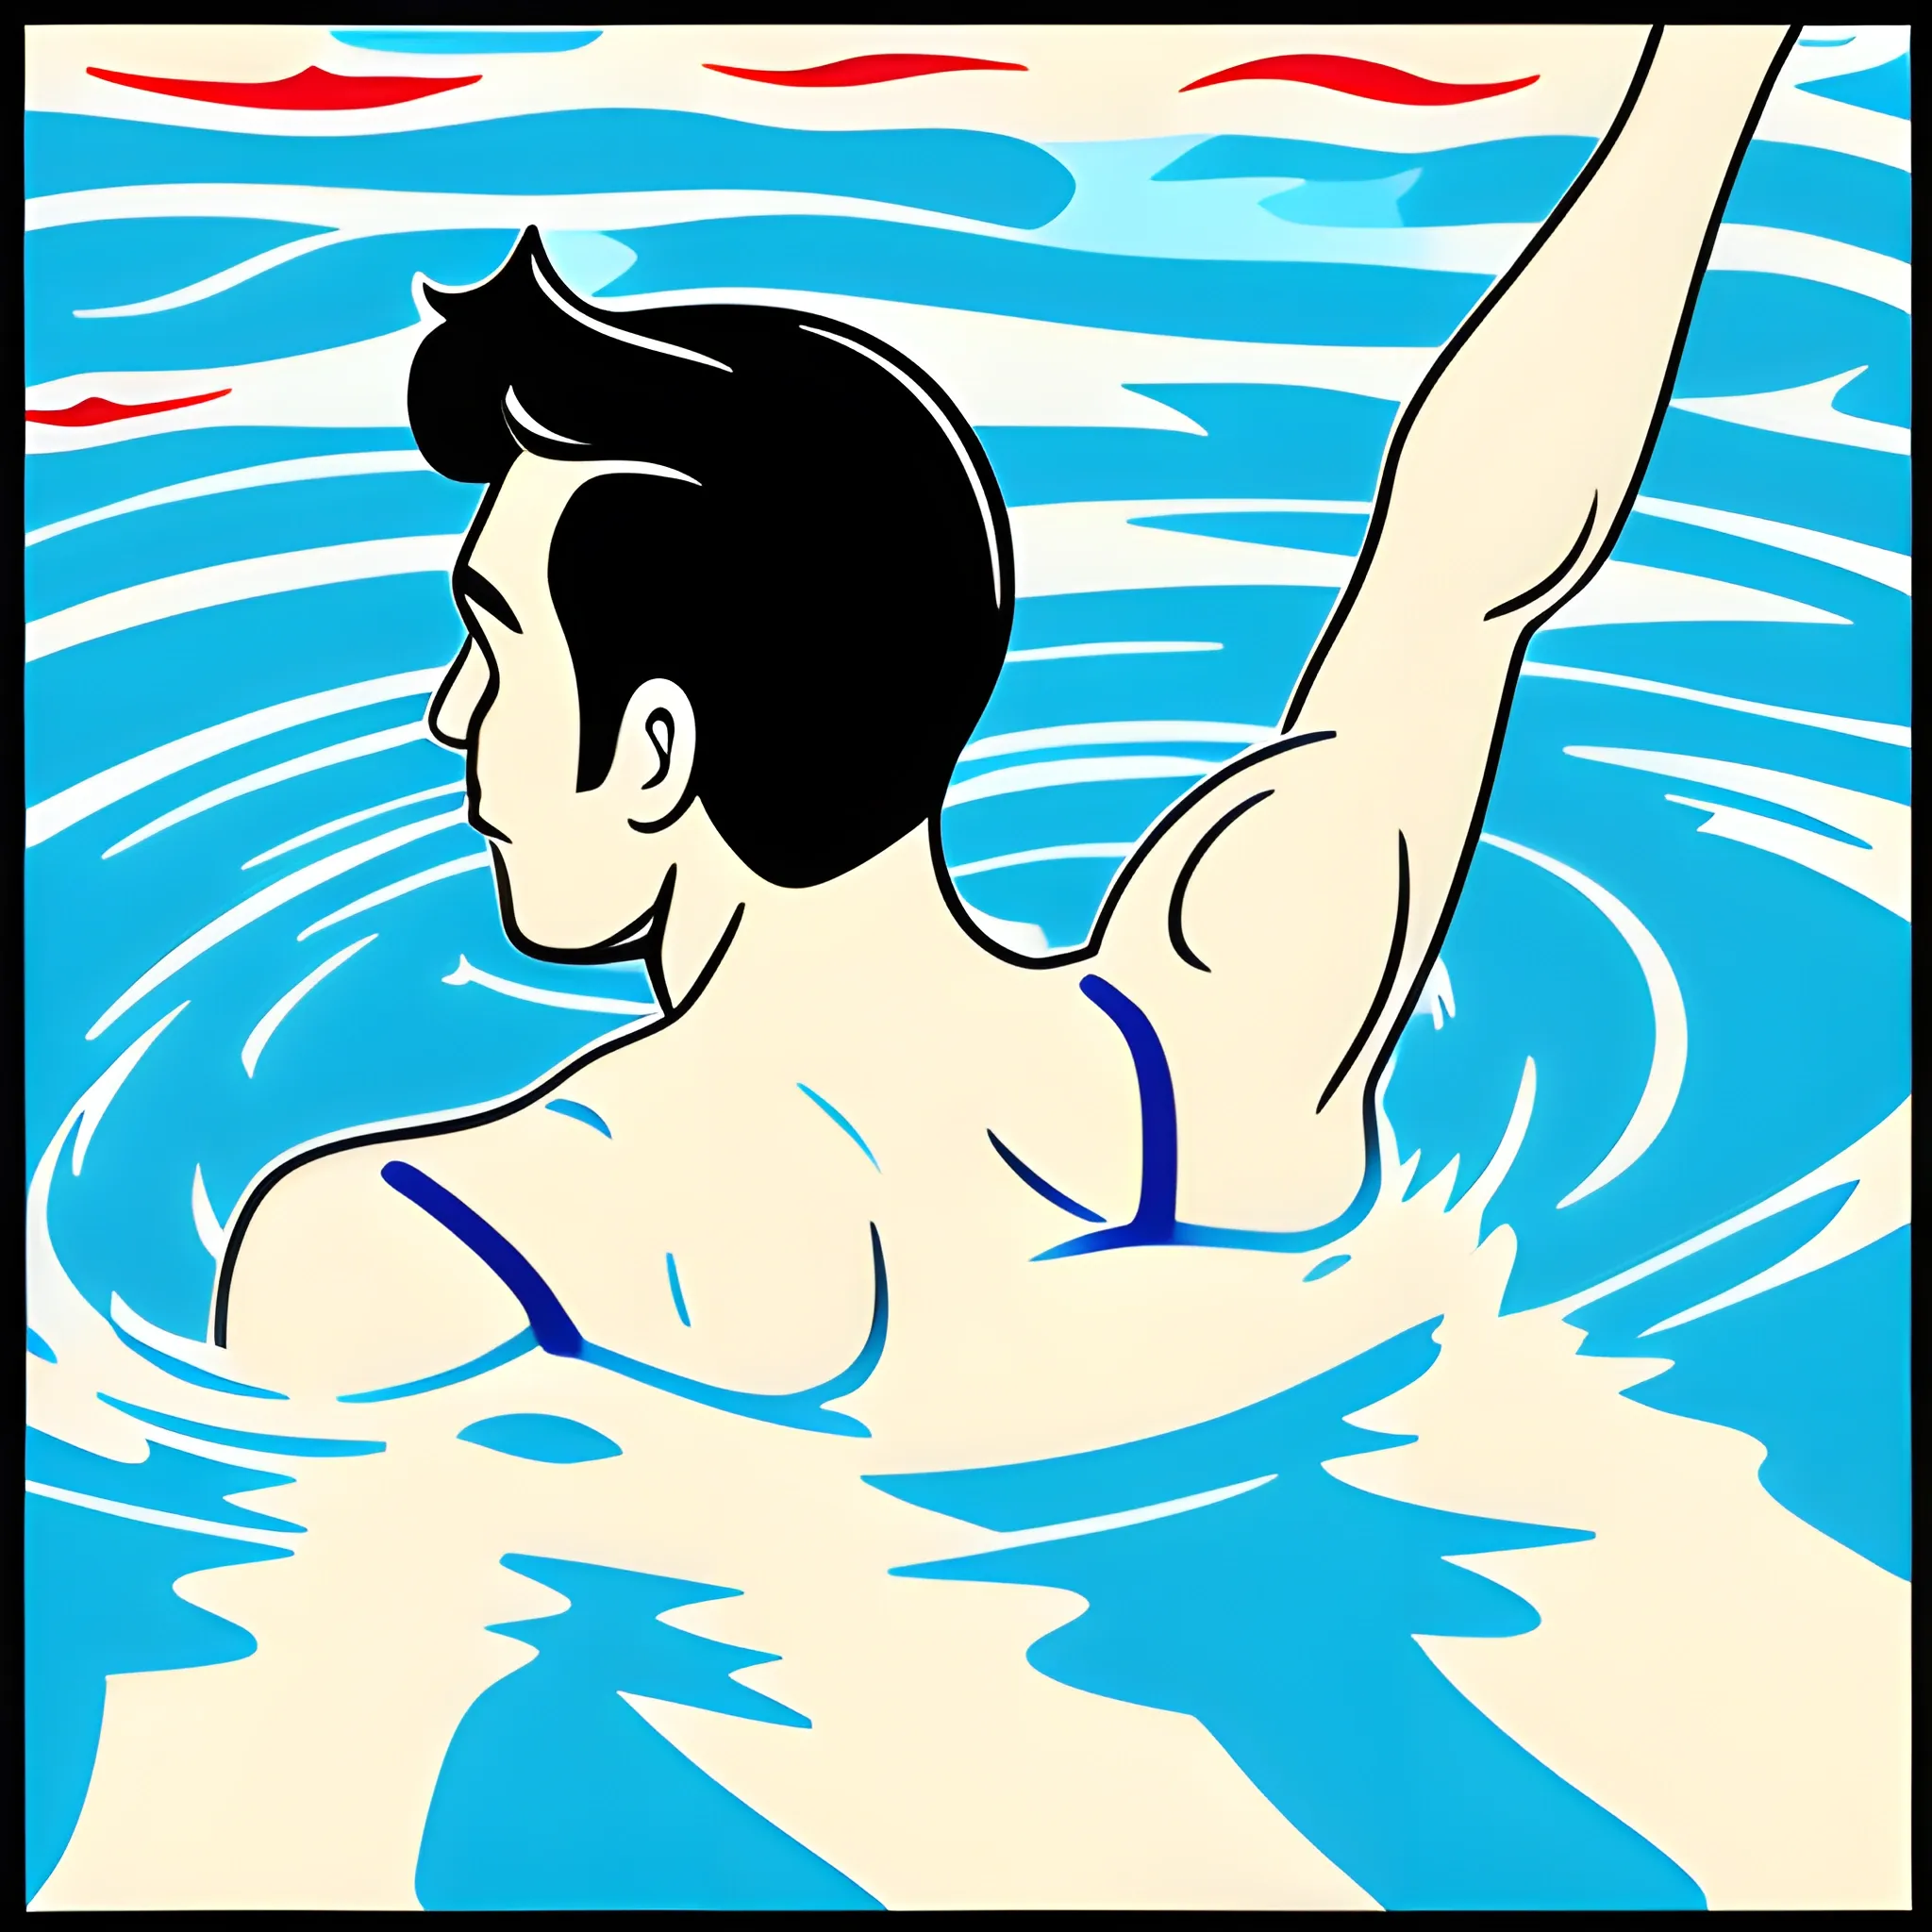 an unkown iconographic character from behind swimming in a blue river, cartoon